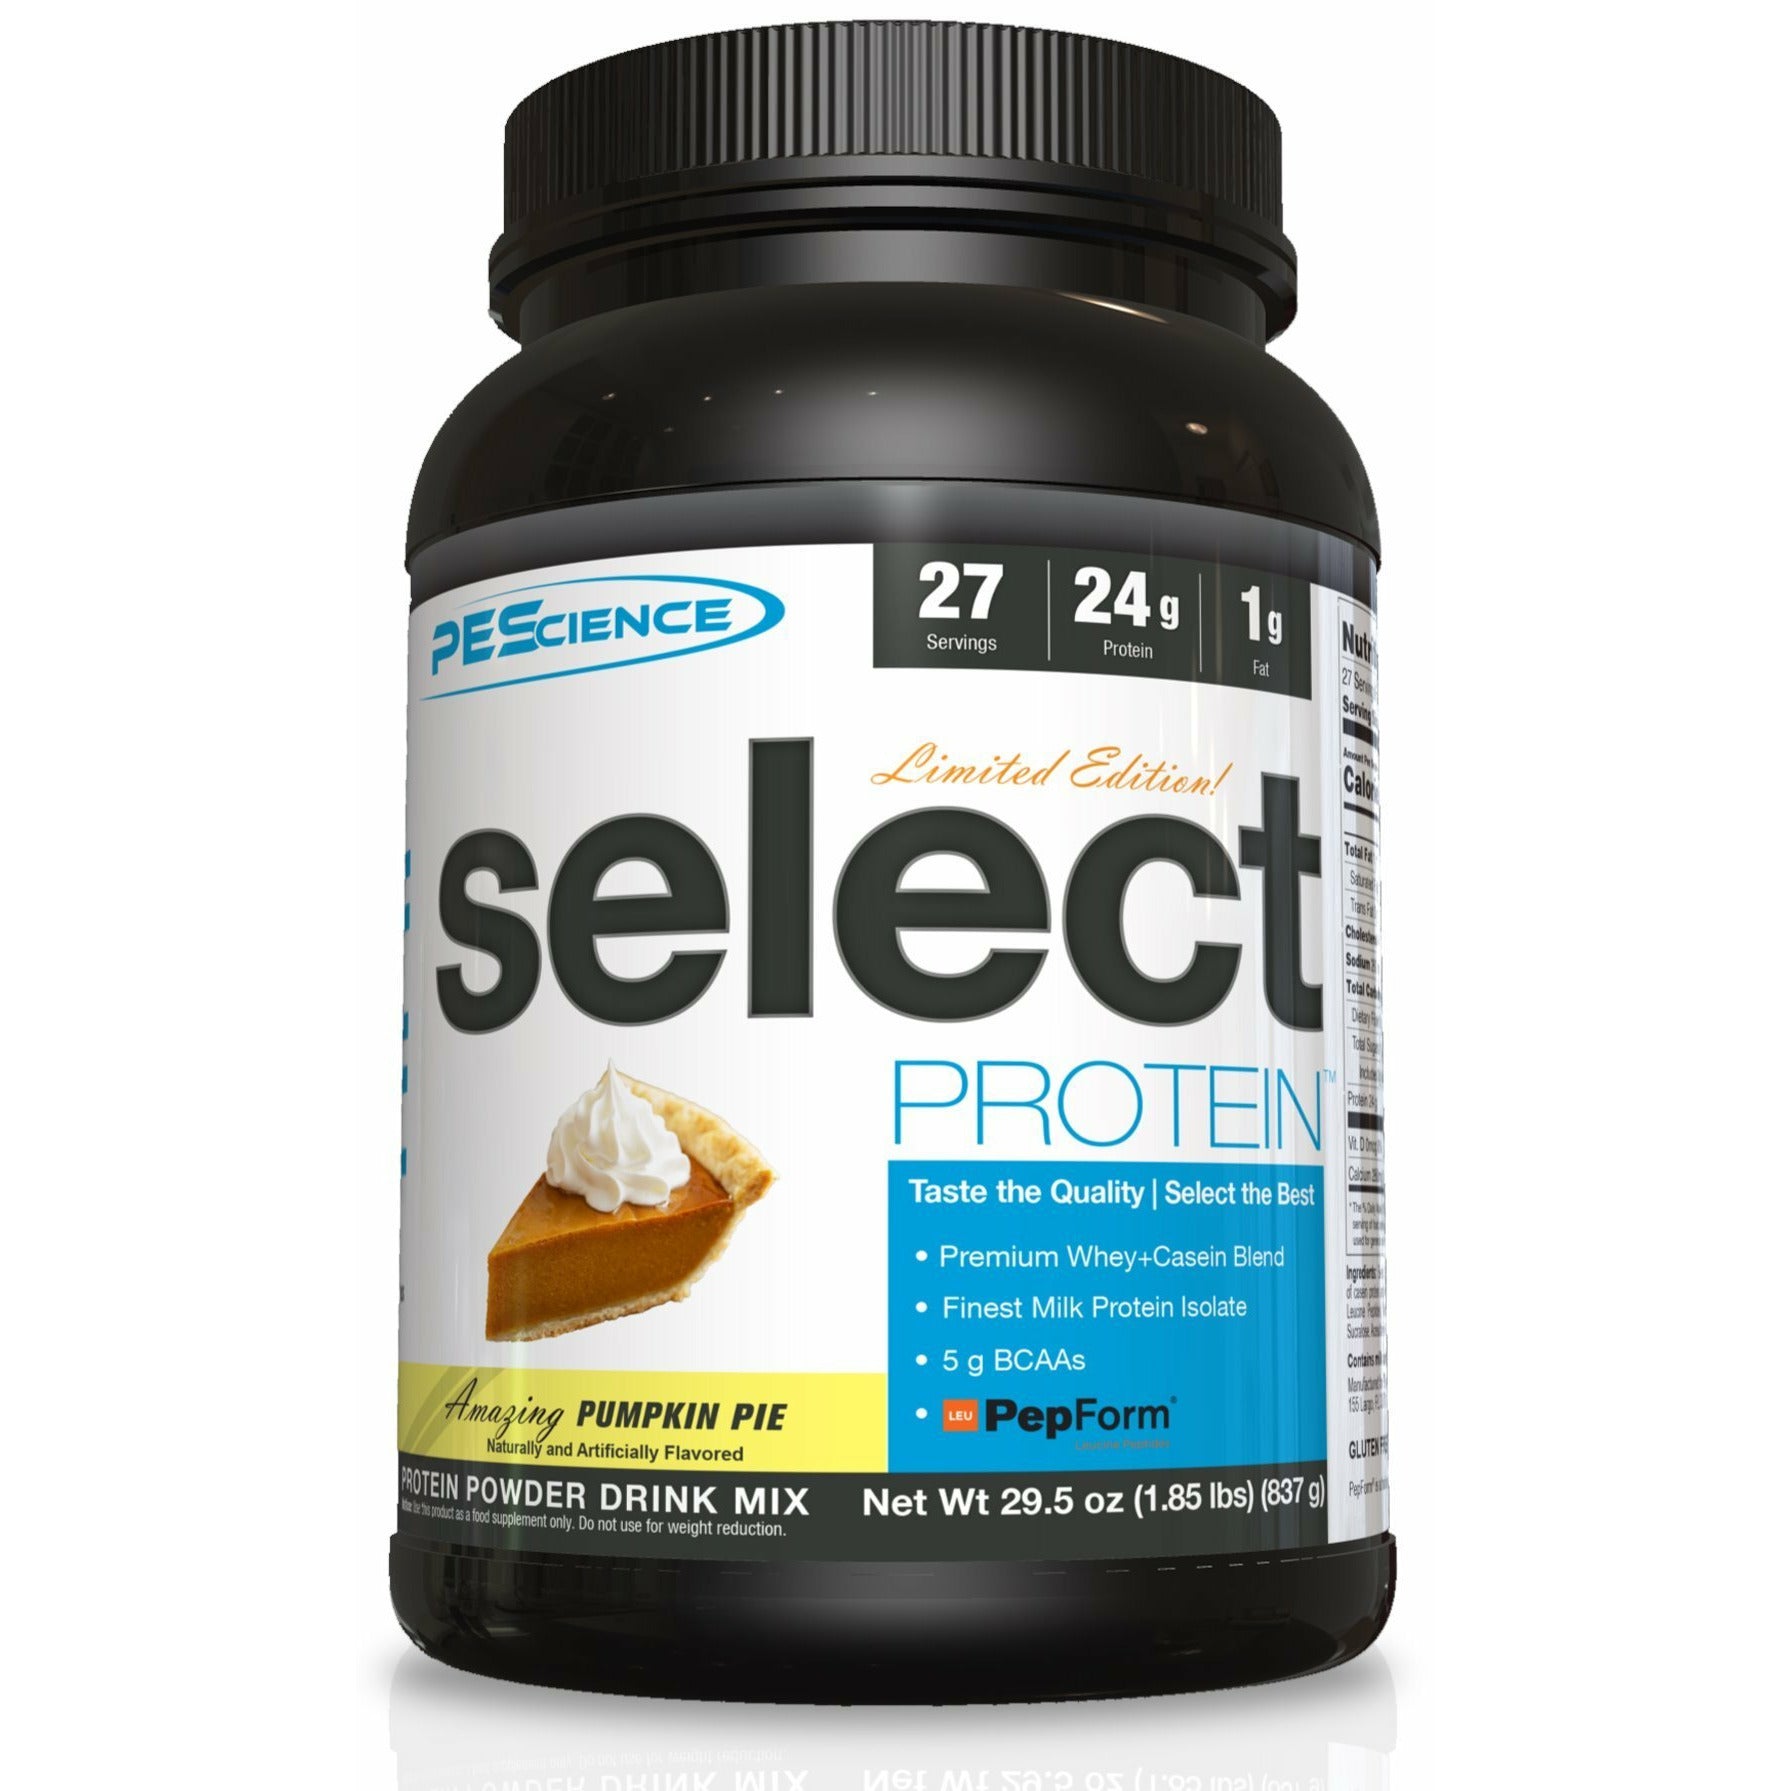 PEScience Select Protein (27 servings) pescience-select-protein-30-servings Whey Protein Blend Pumpkin Pie - LIMITED EDITION PEScience